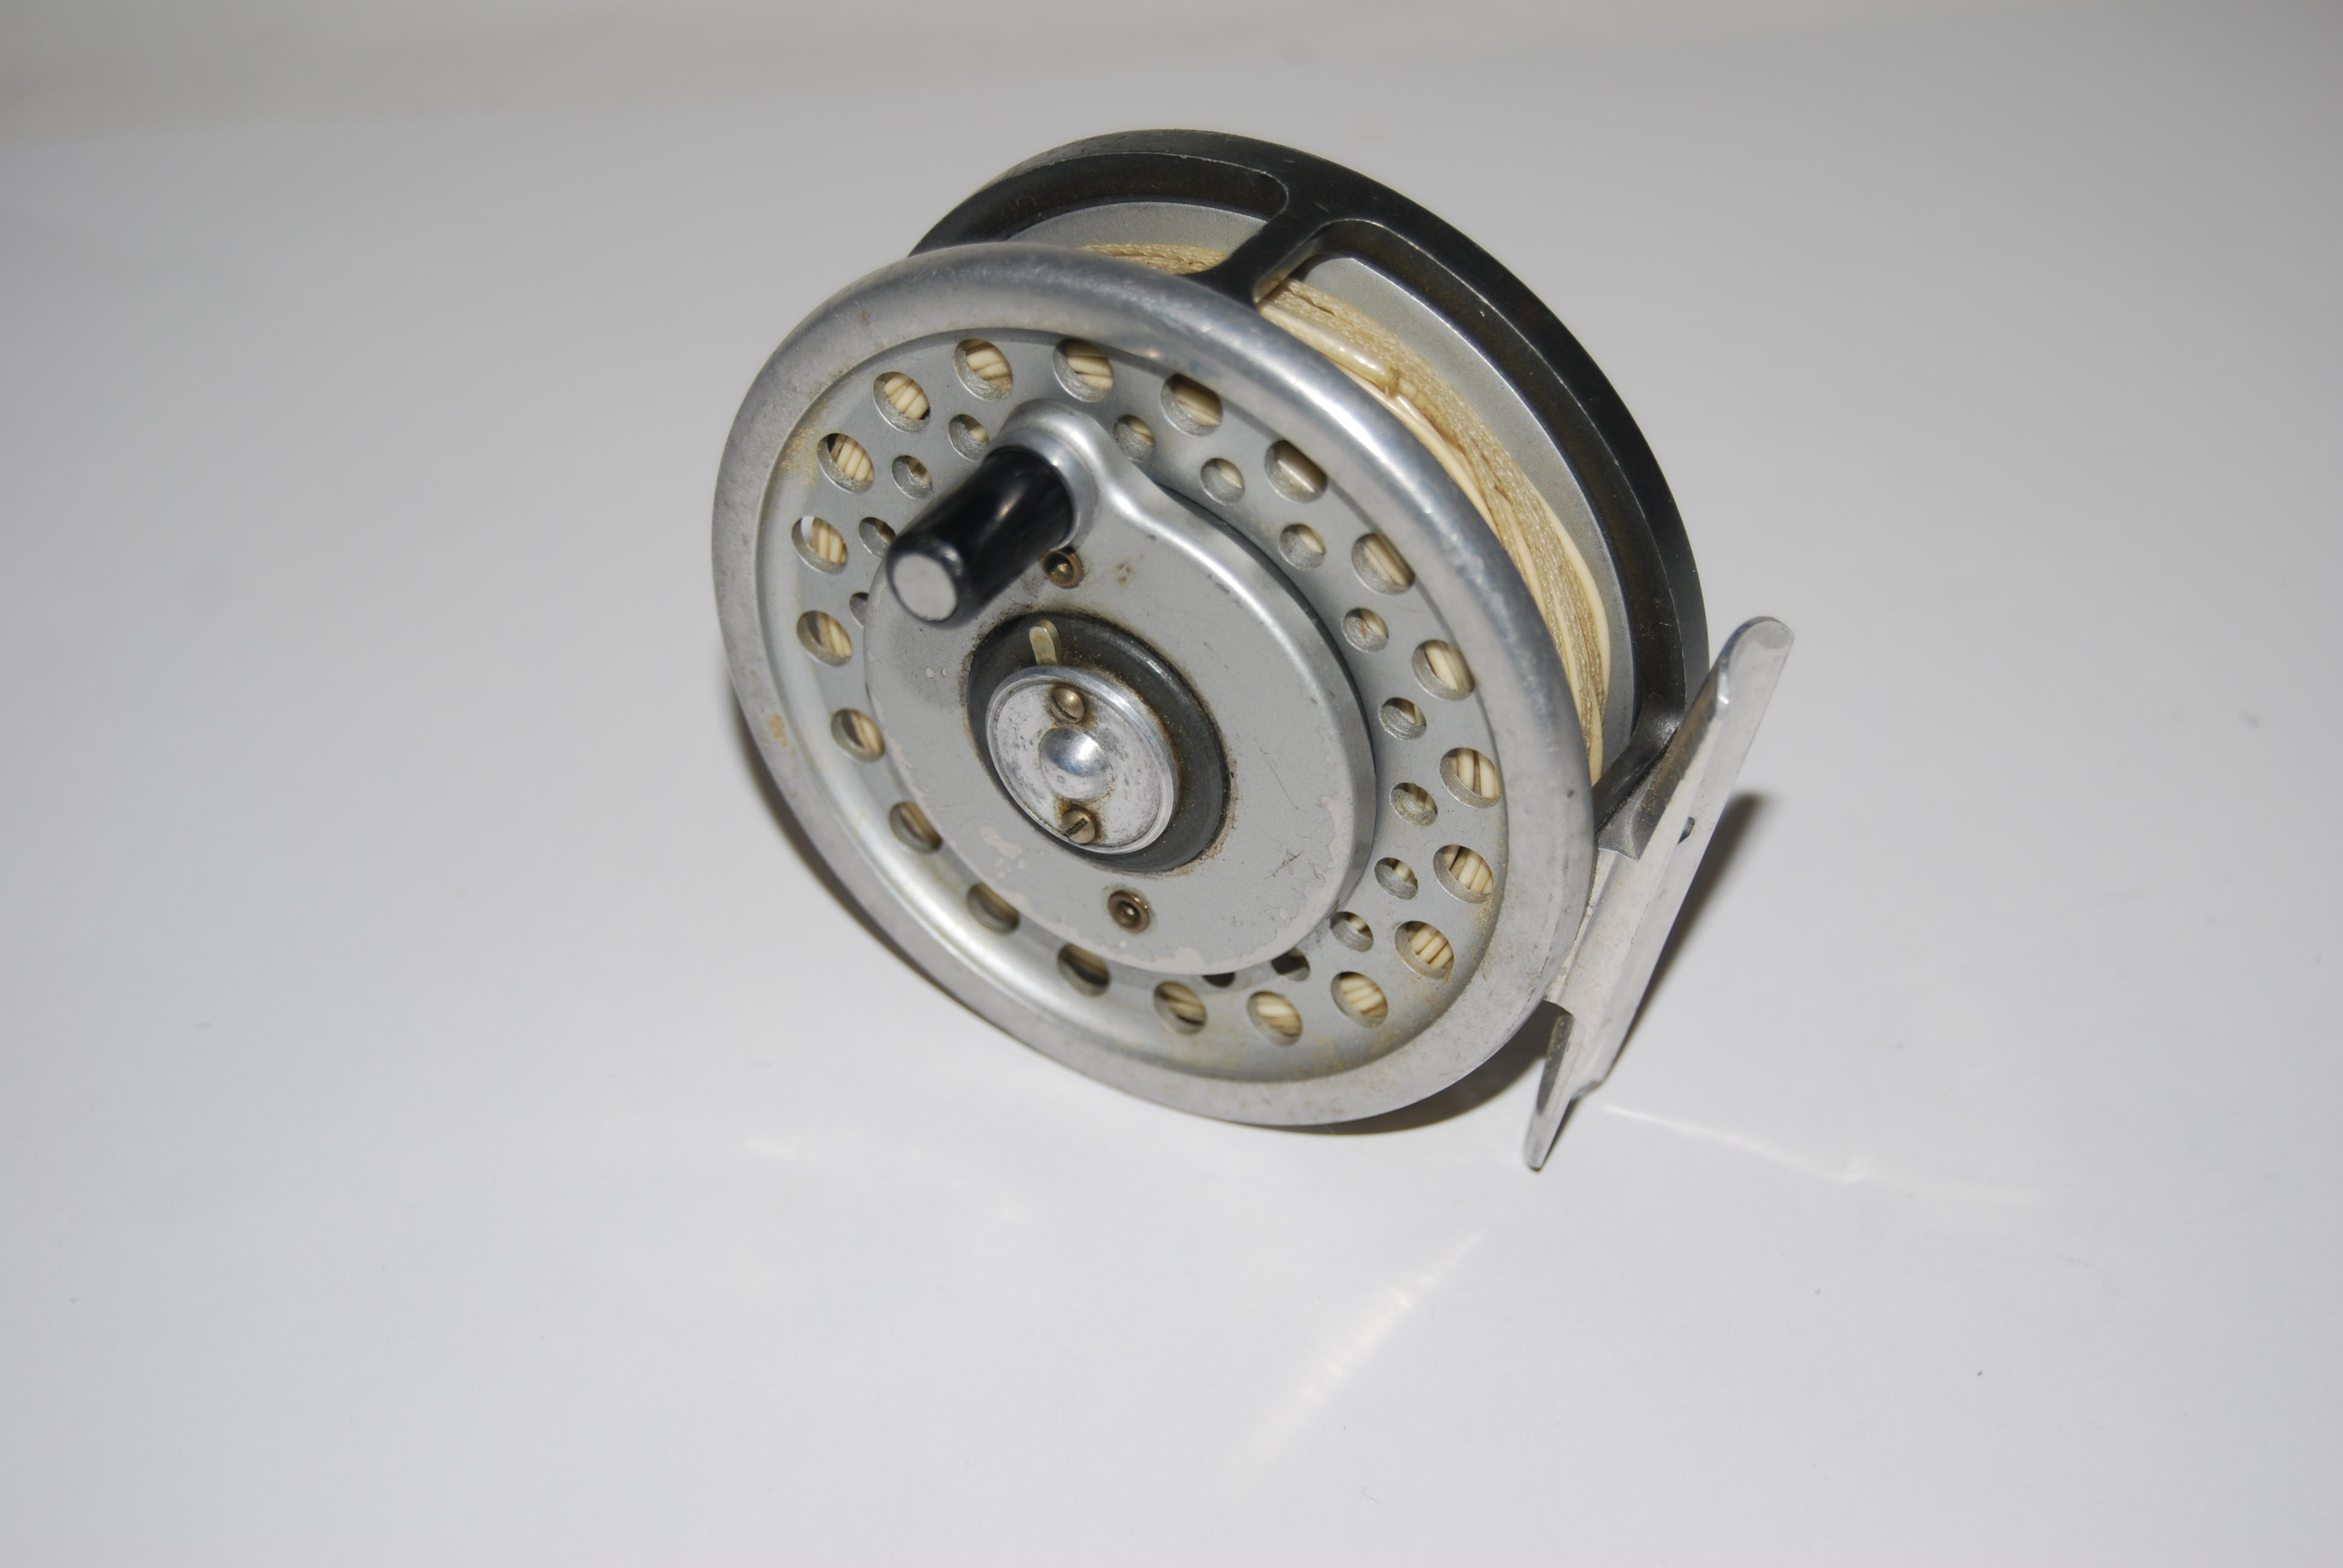 HARDY MARQUIS multiplier 8/9 fly reel USED